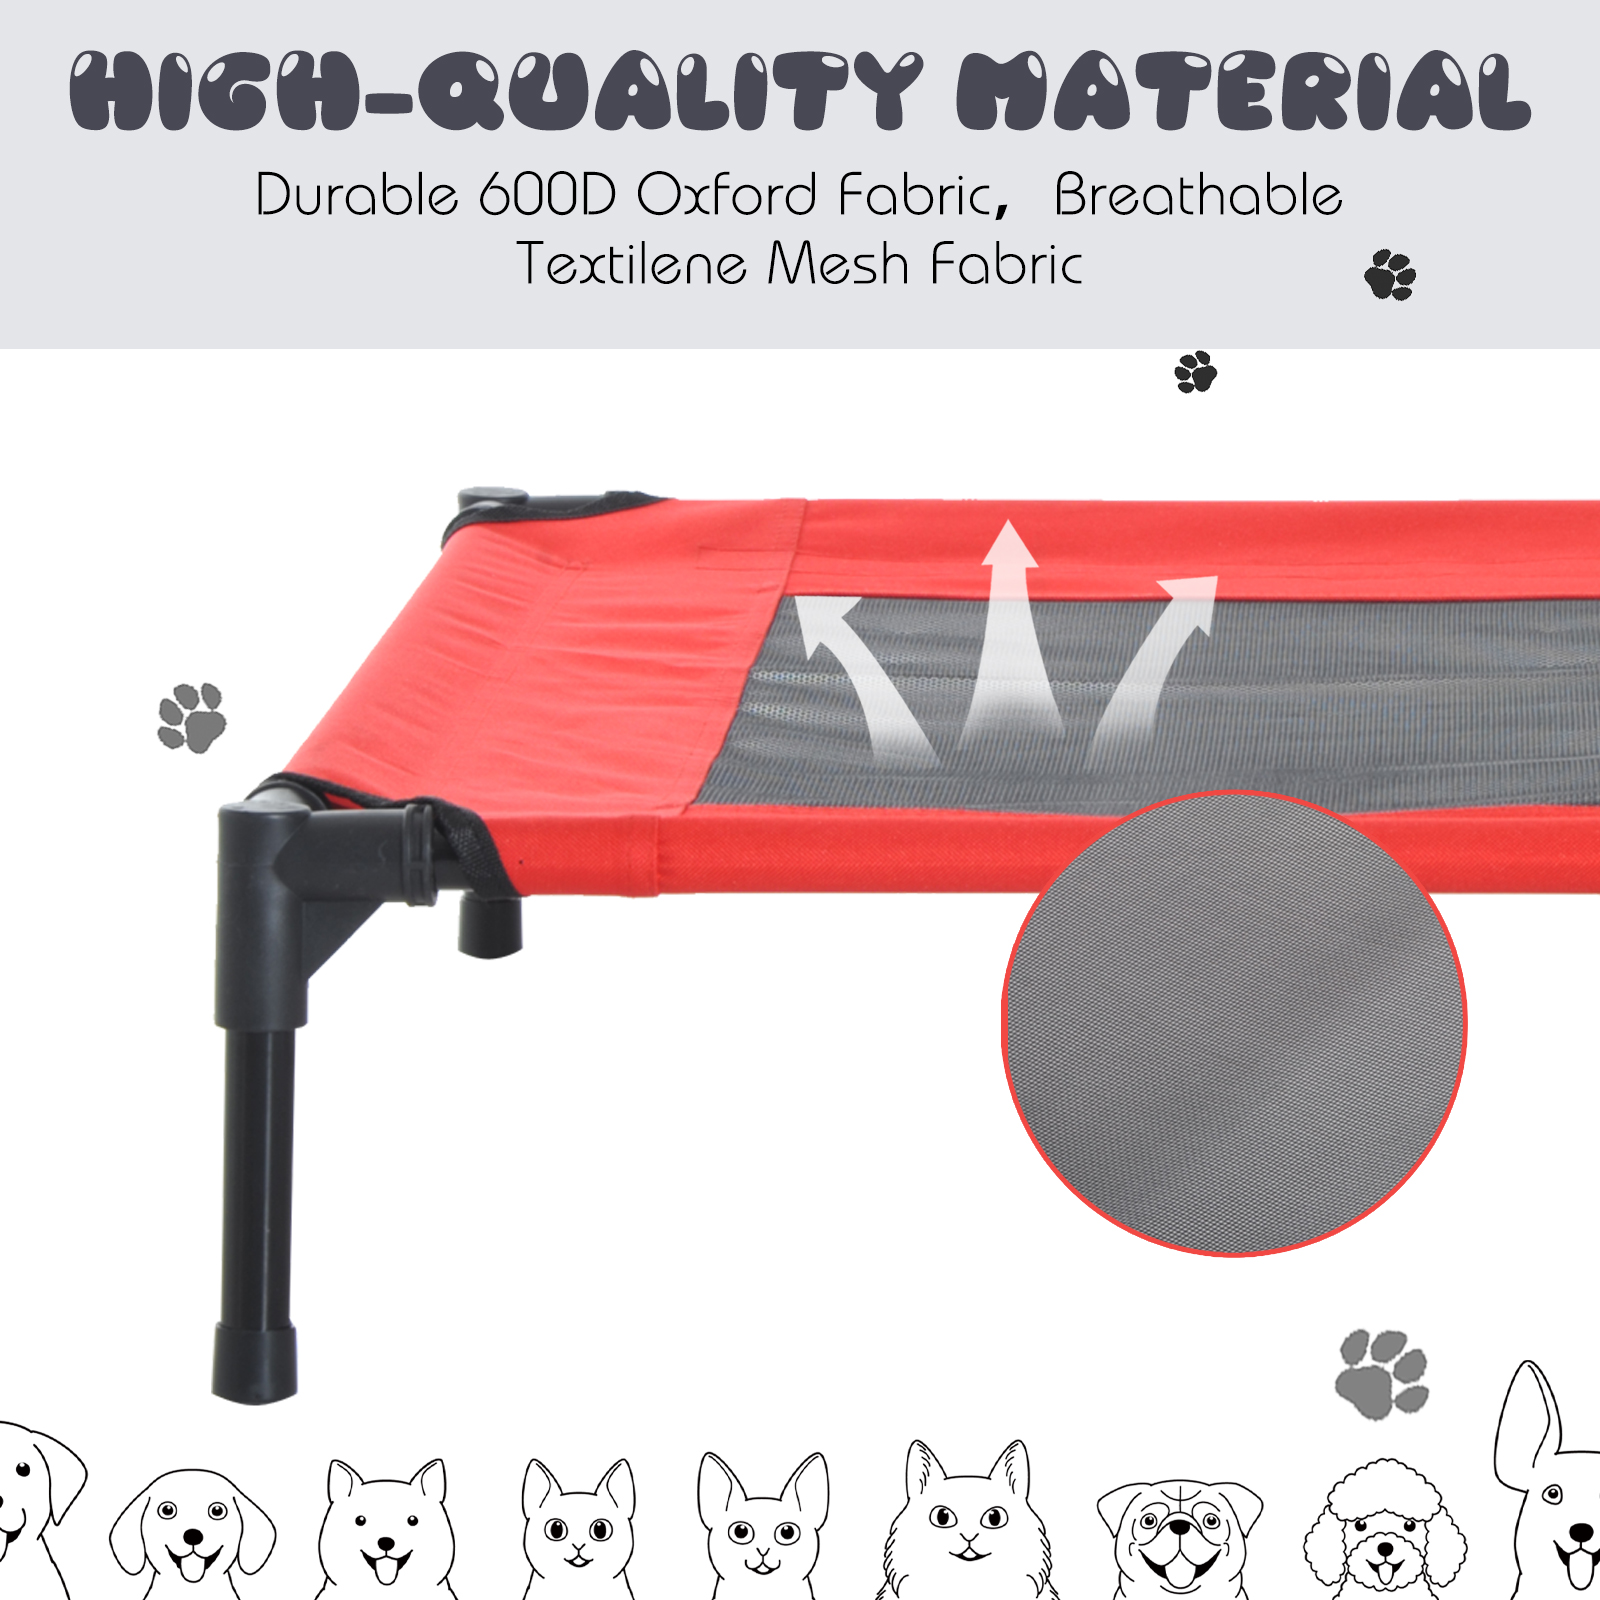 PawHut Raised Dog Bed Cat Elevated Lifted Portable Camping w/ Metal Frame Black and Red (Small) Sleeping Mats and Airbeds Cosy Camping Co.   